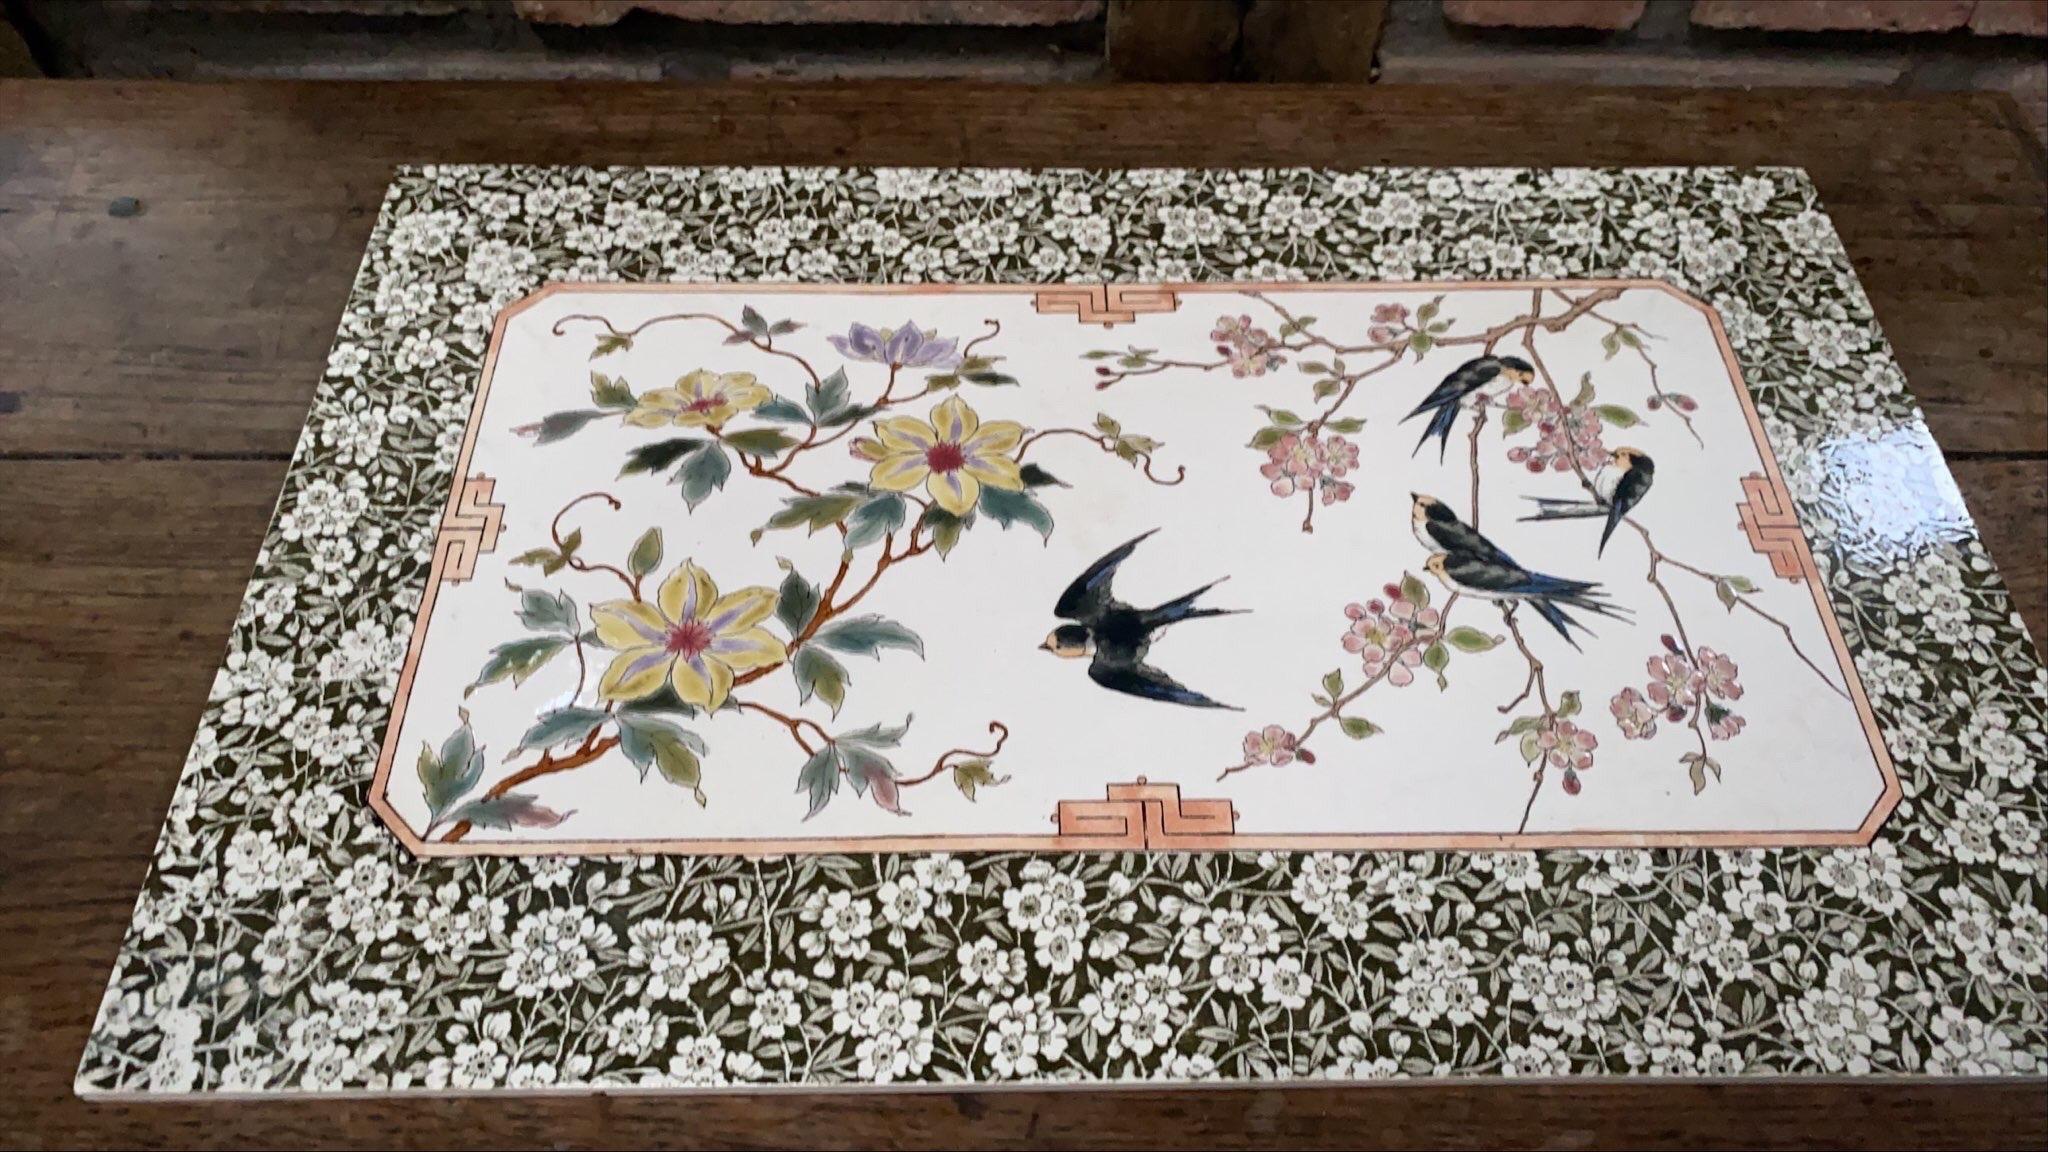 Large 19th century ceramic plaque with birds & flowers.
Japonist period.
Possibly Sarreguemines unsigned.